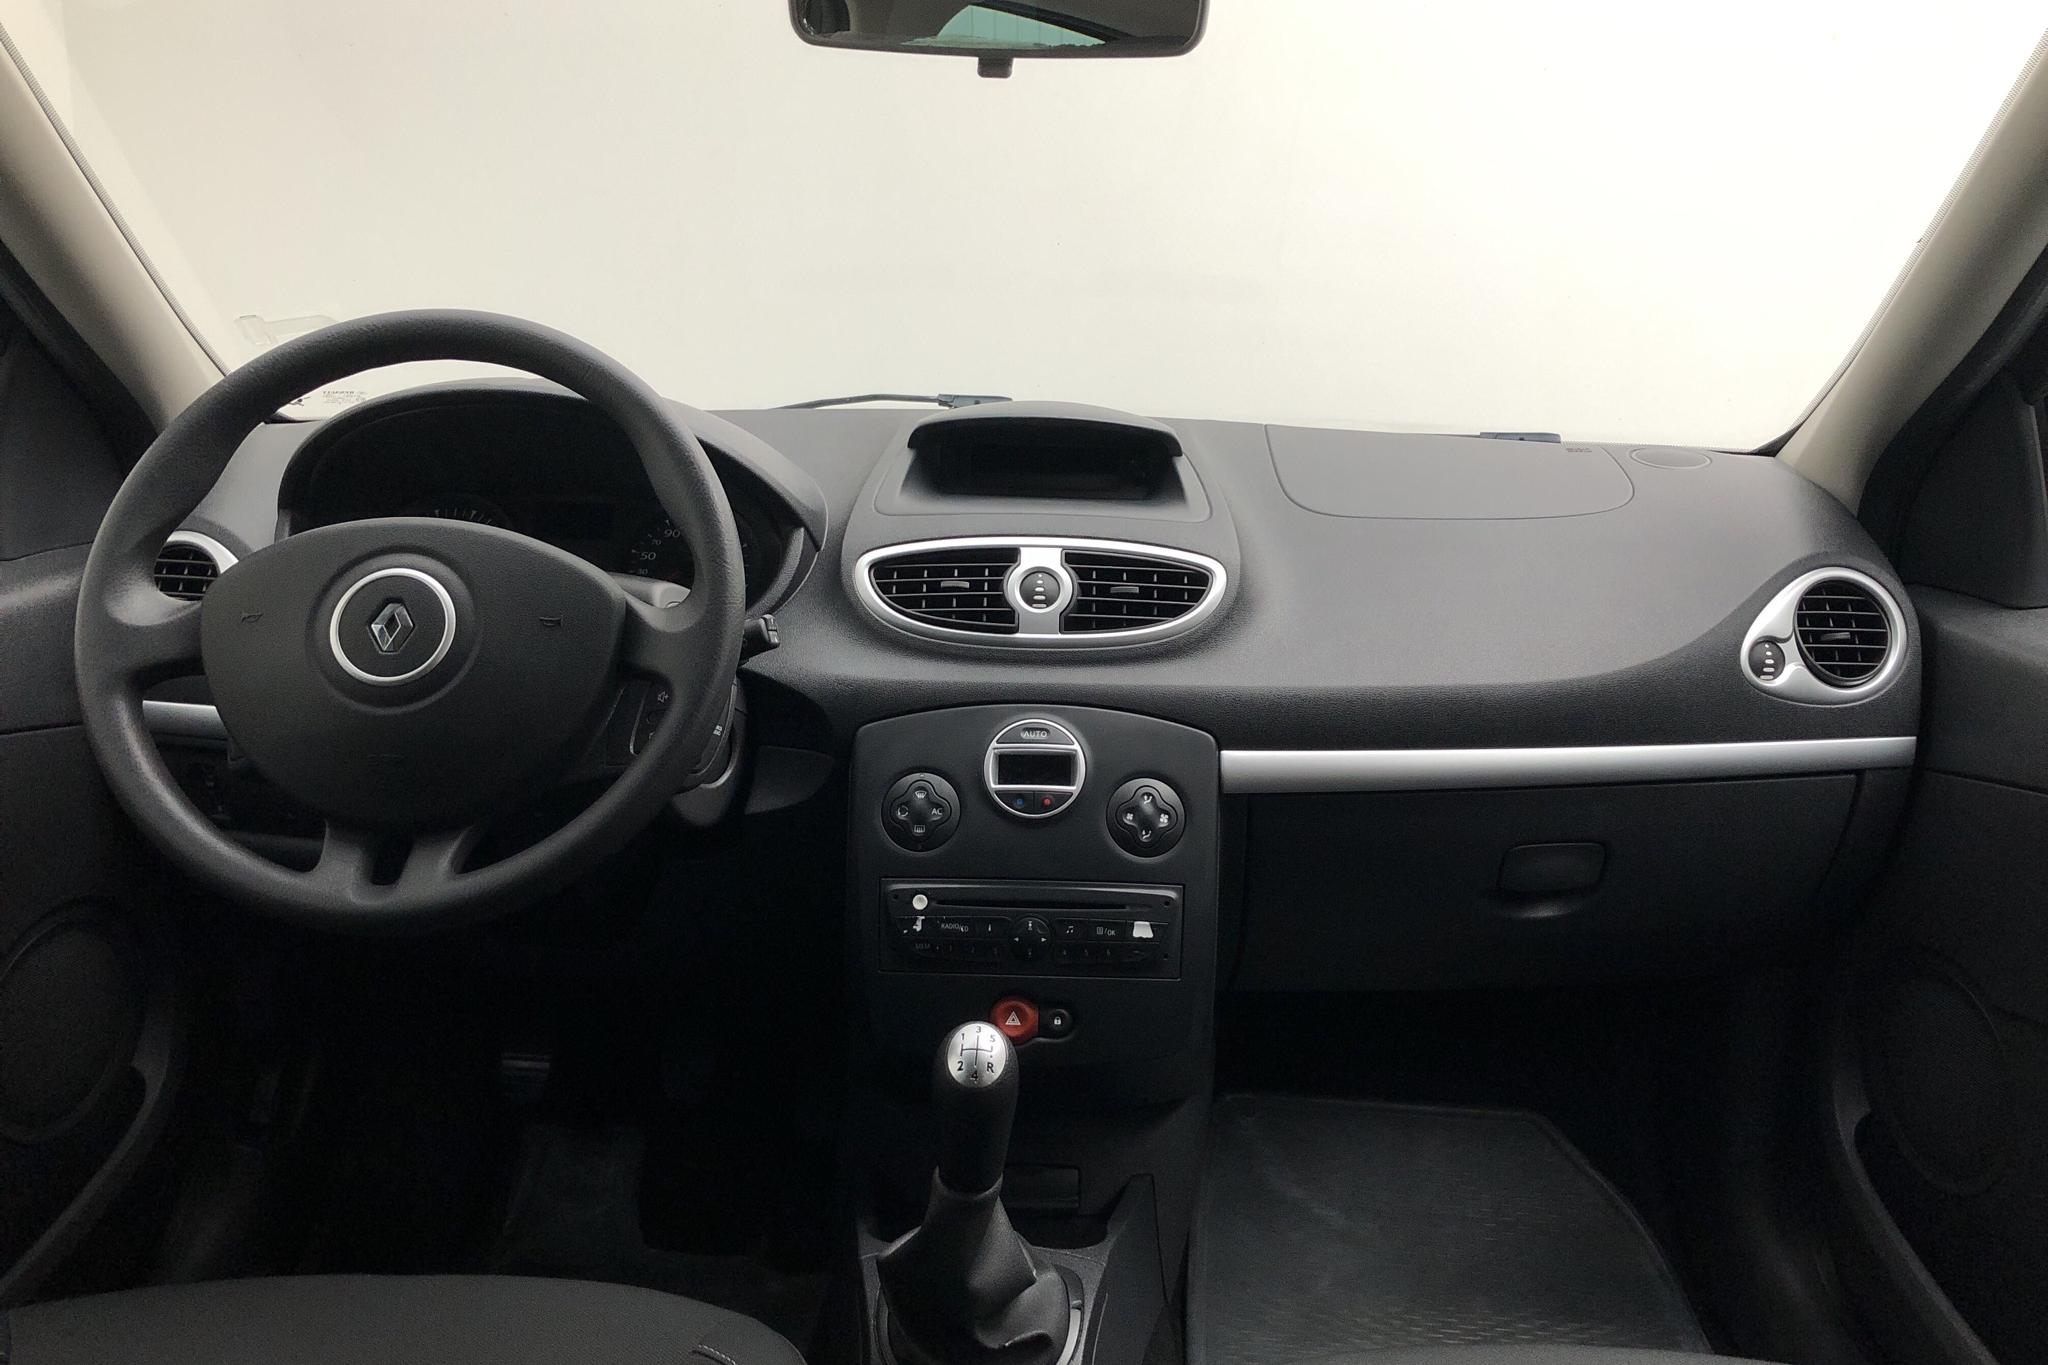 Renault Clio 1.5 DCi Initiale (59 Reg) - Sold - Ymark Vehicle Services